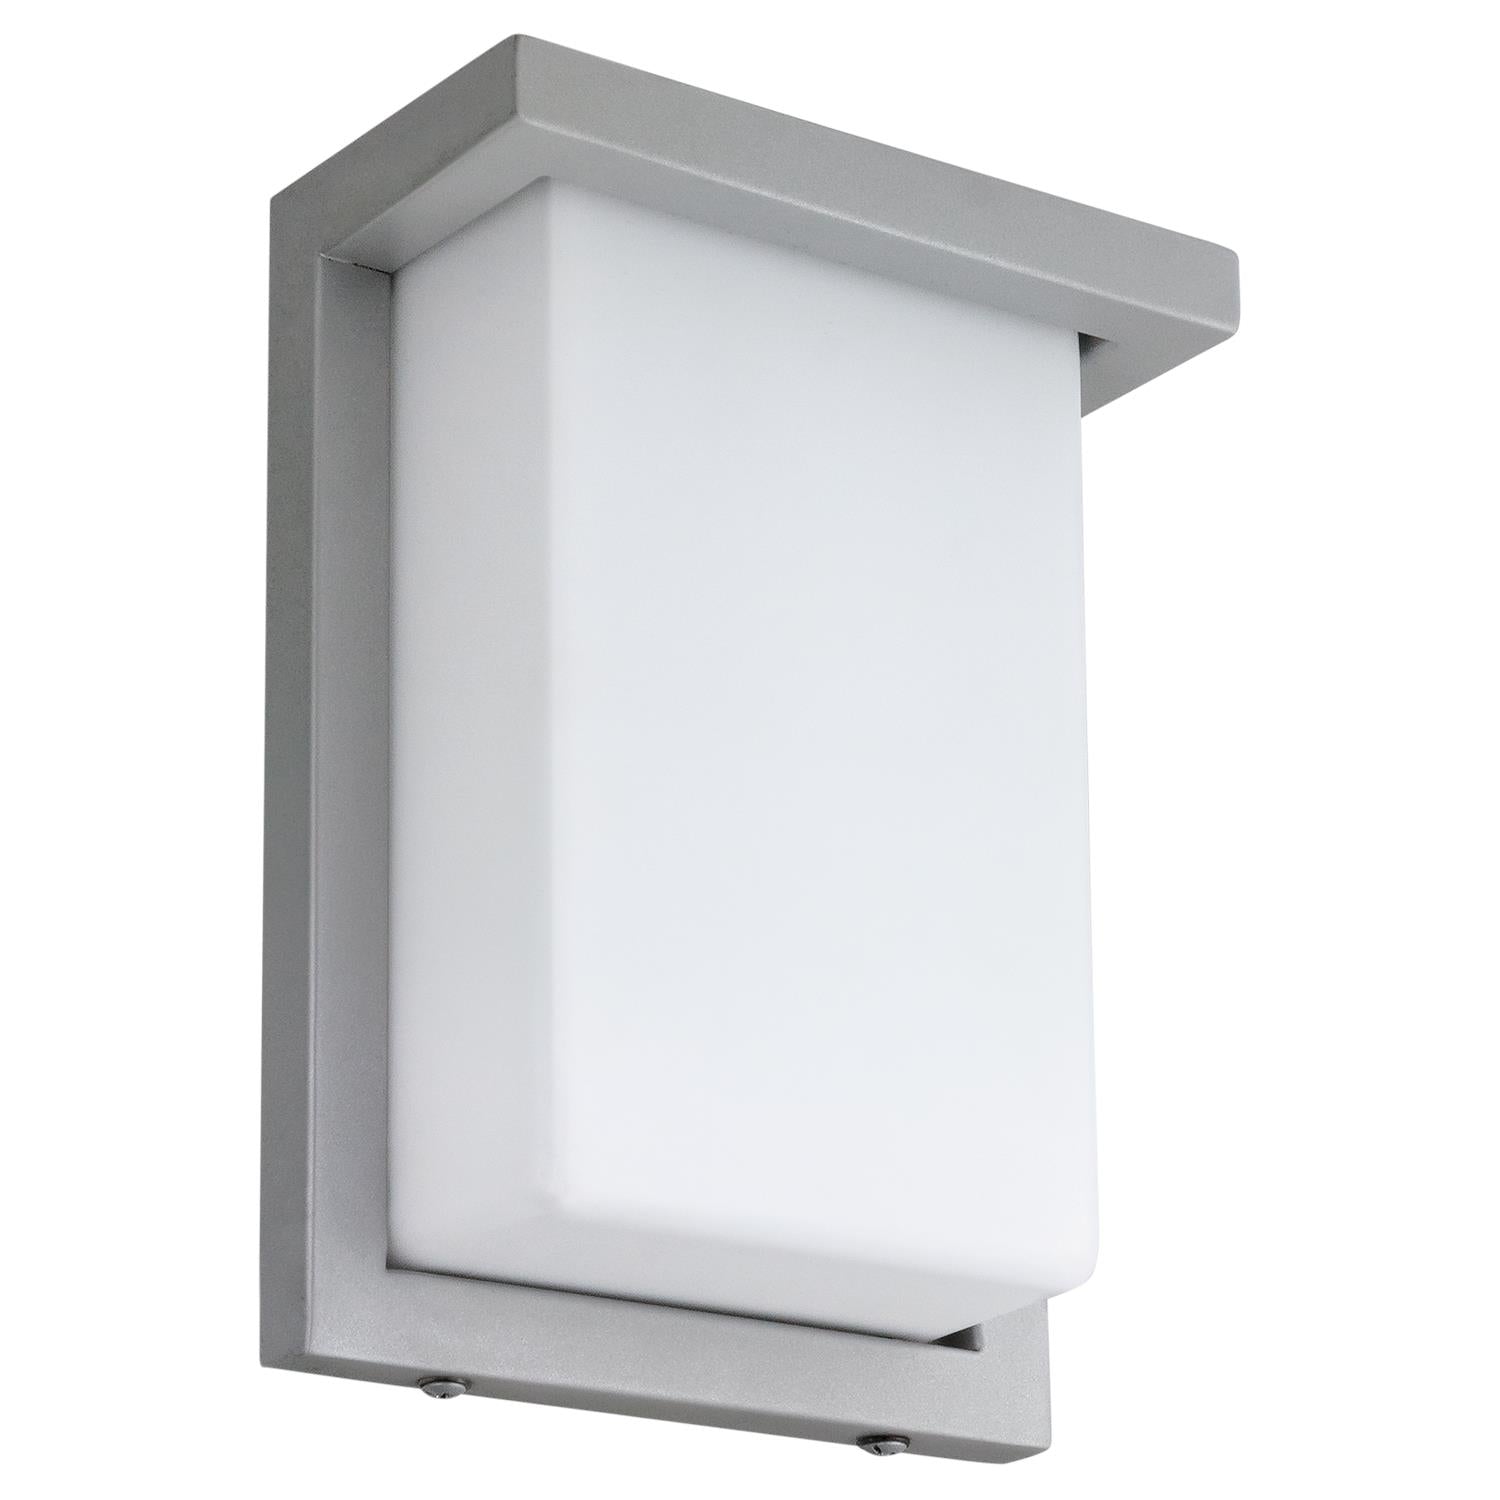 SUNLITE 8" 12w Rectangle LED Wall Sconce Fixture 3000K-Warm White Silver Finish